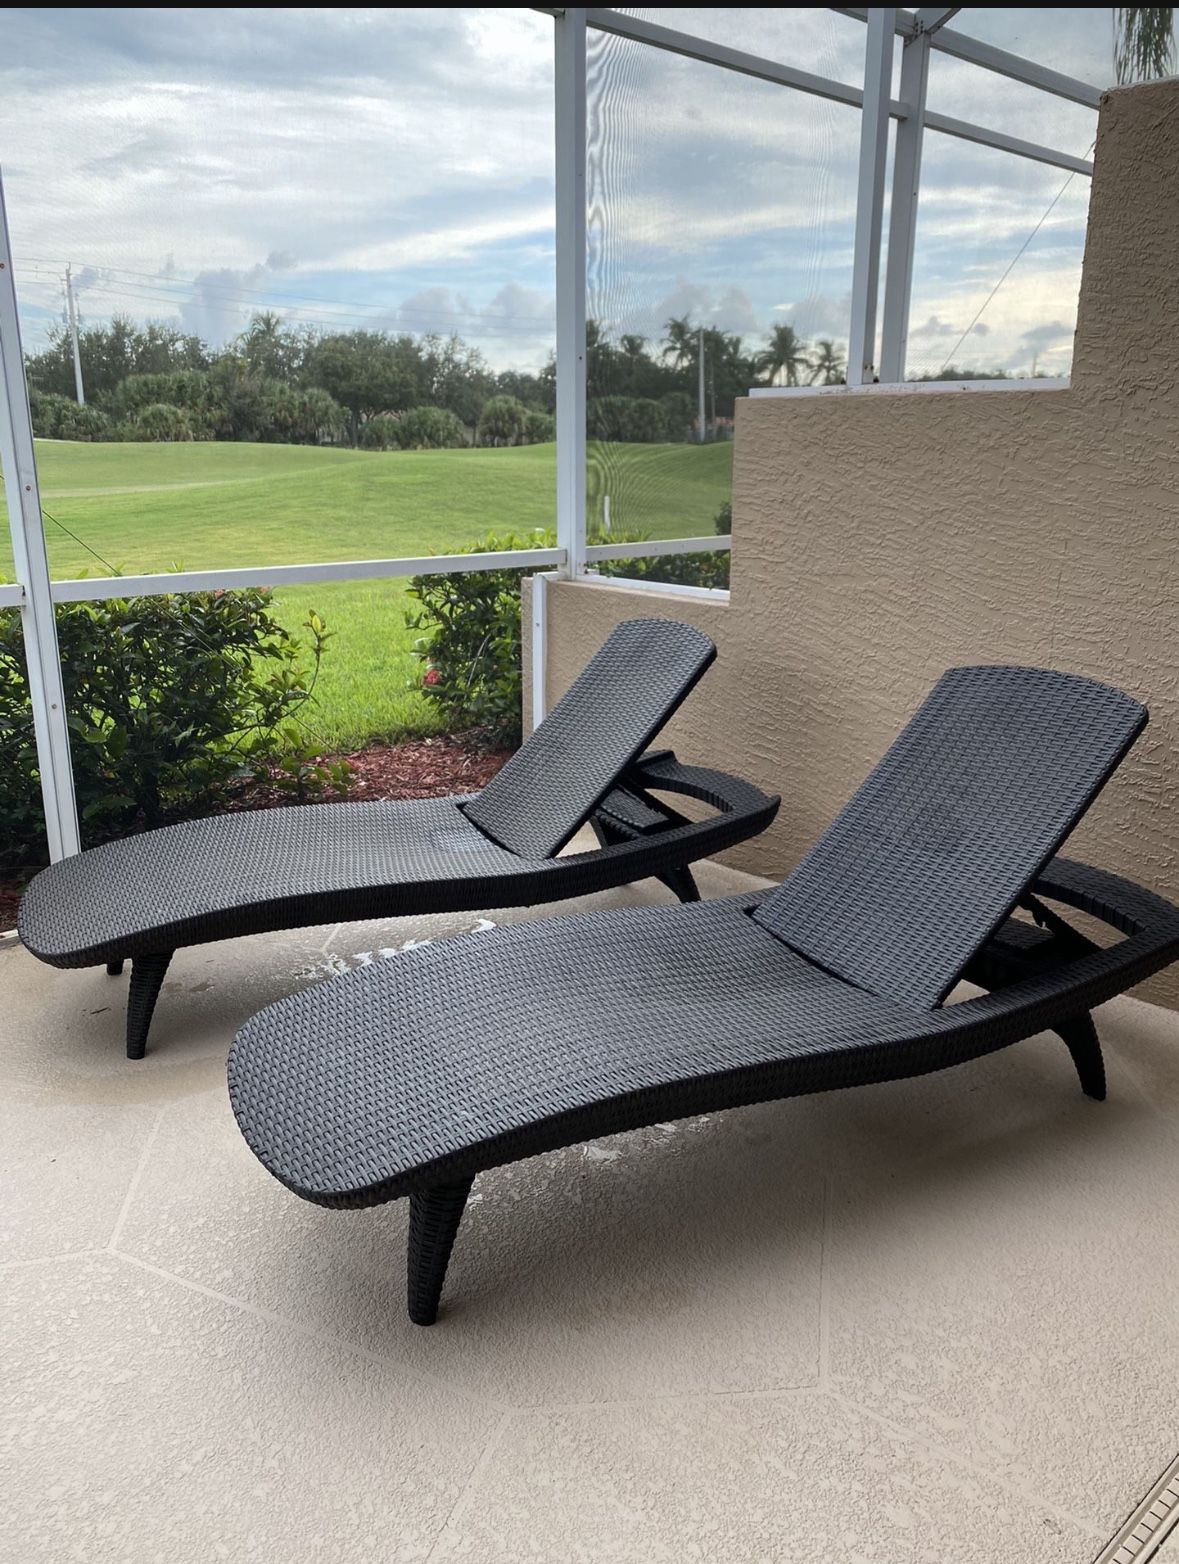 Pair Of Pacific Grey All-Weather Adjustable Resin Patio Chaise Lounger 